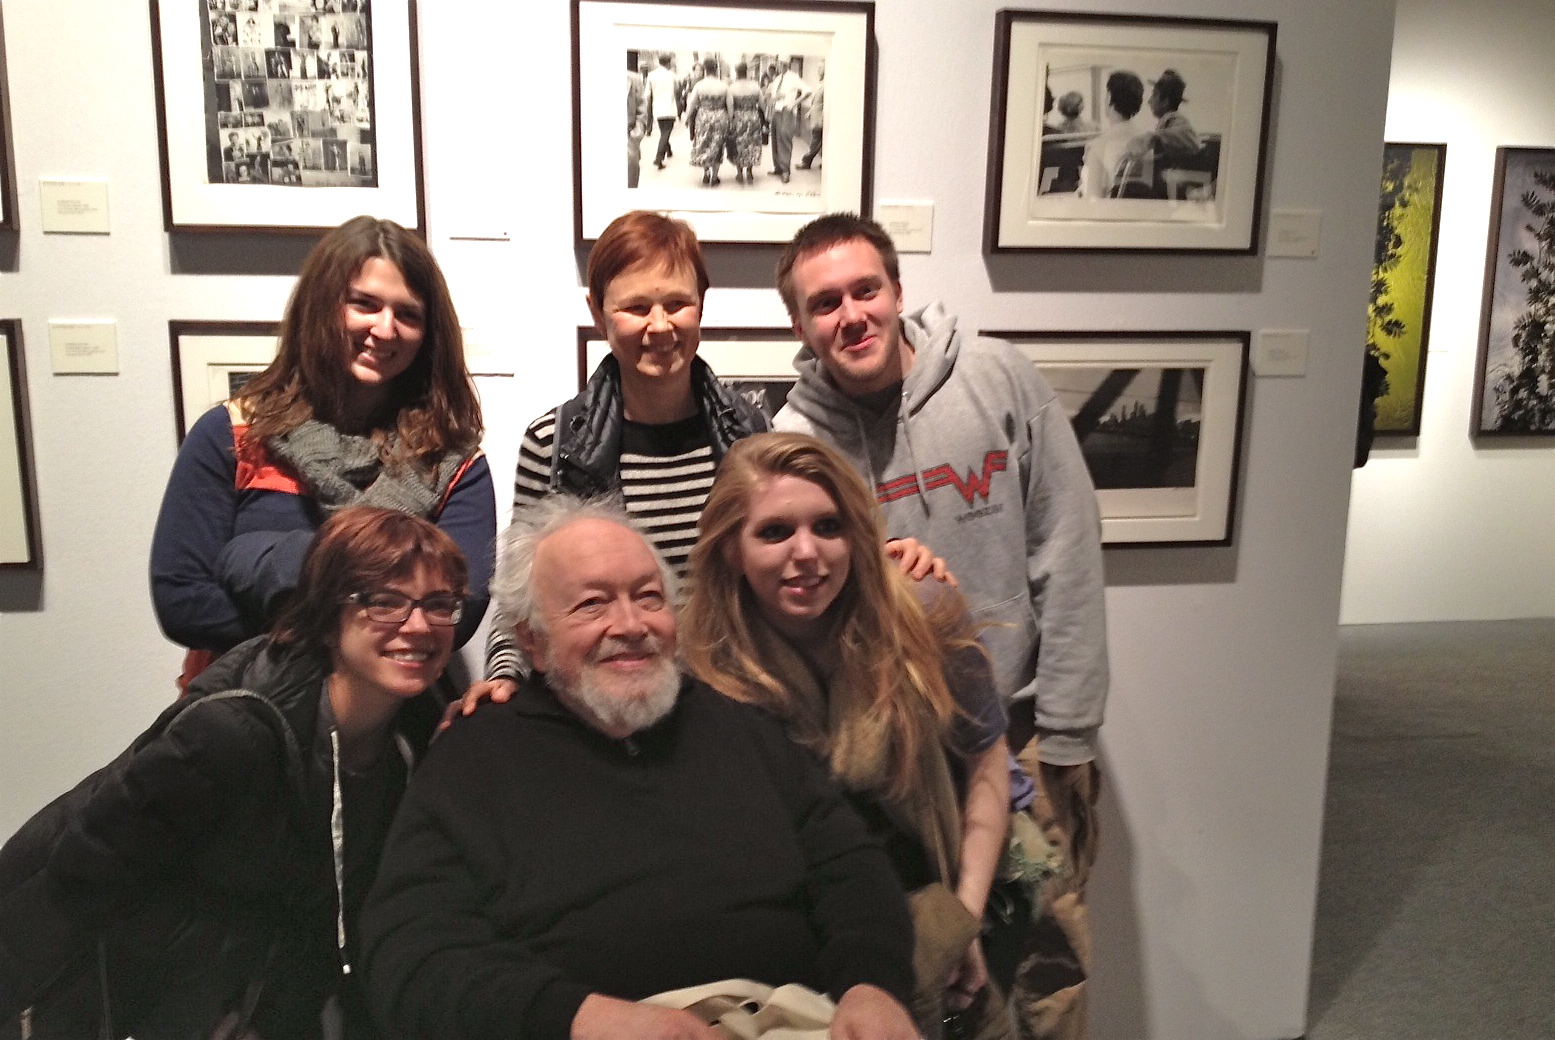 Here I am at AIPAD surrounded by students from The New Hampshire Institute of Art